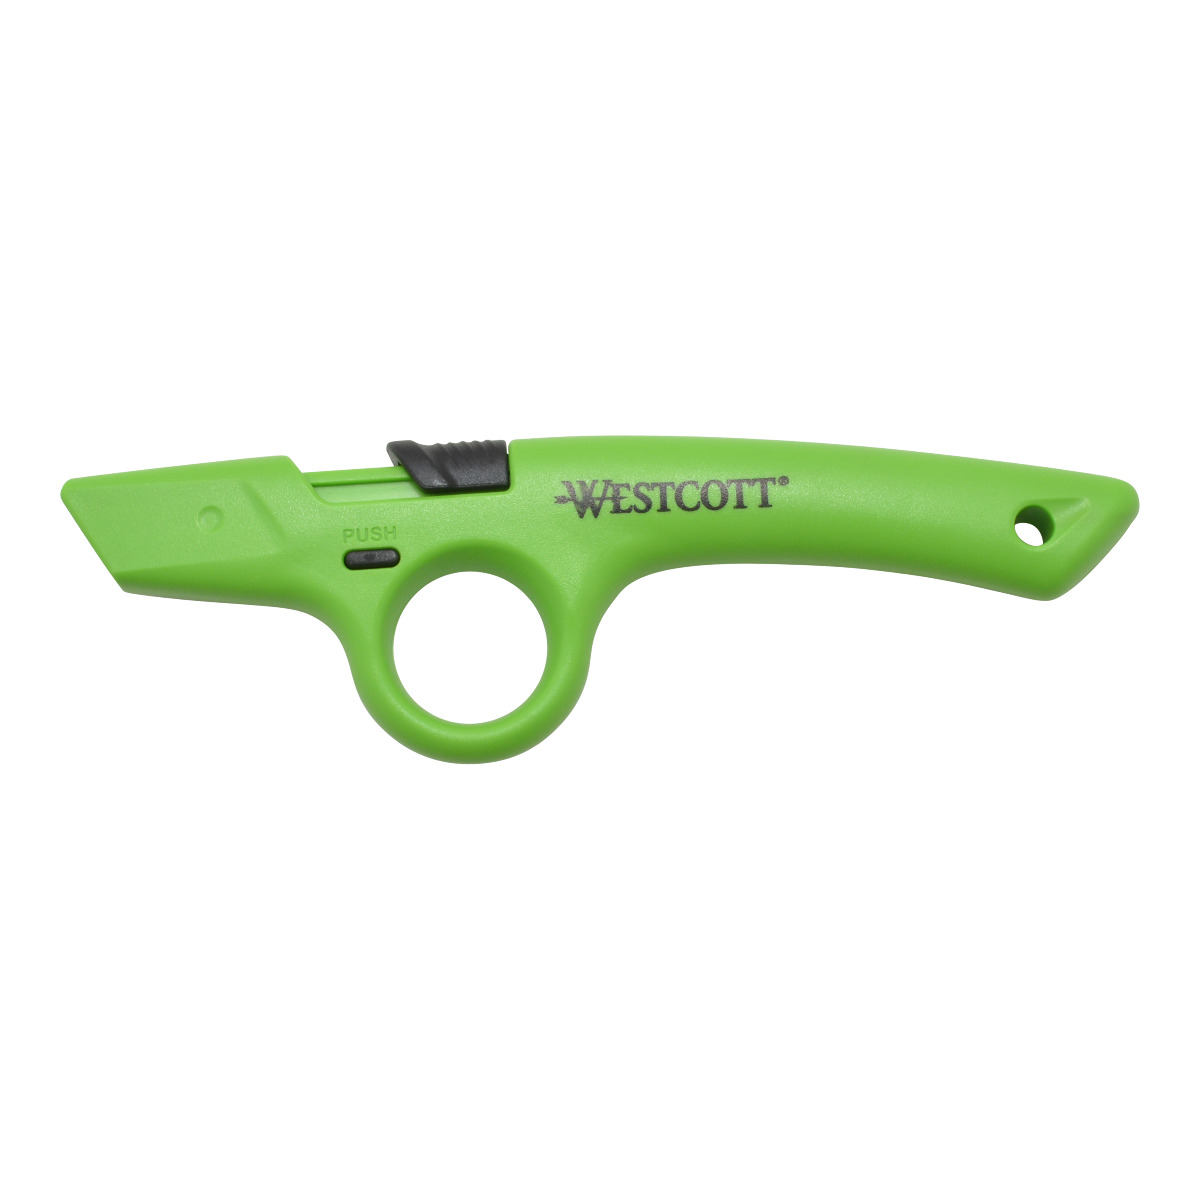 Clauss Westcott Ceramic Utility Cutter with Rear Blade (17969-PARENT) -  Home and Industrial Knives